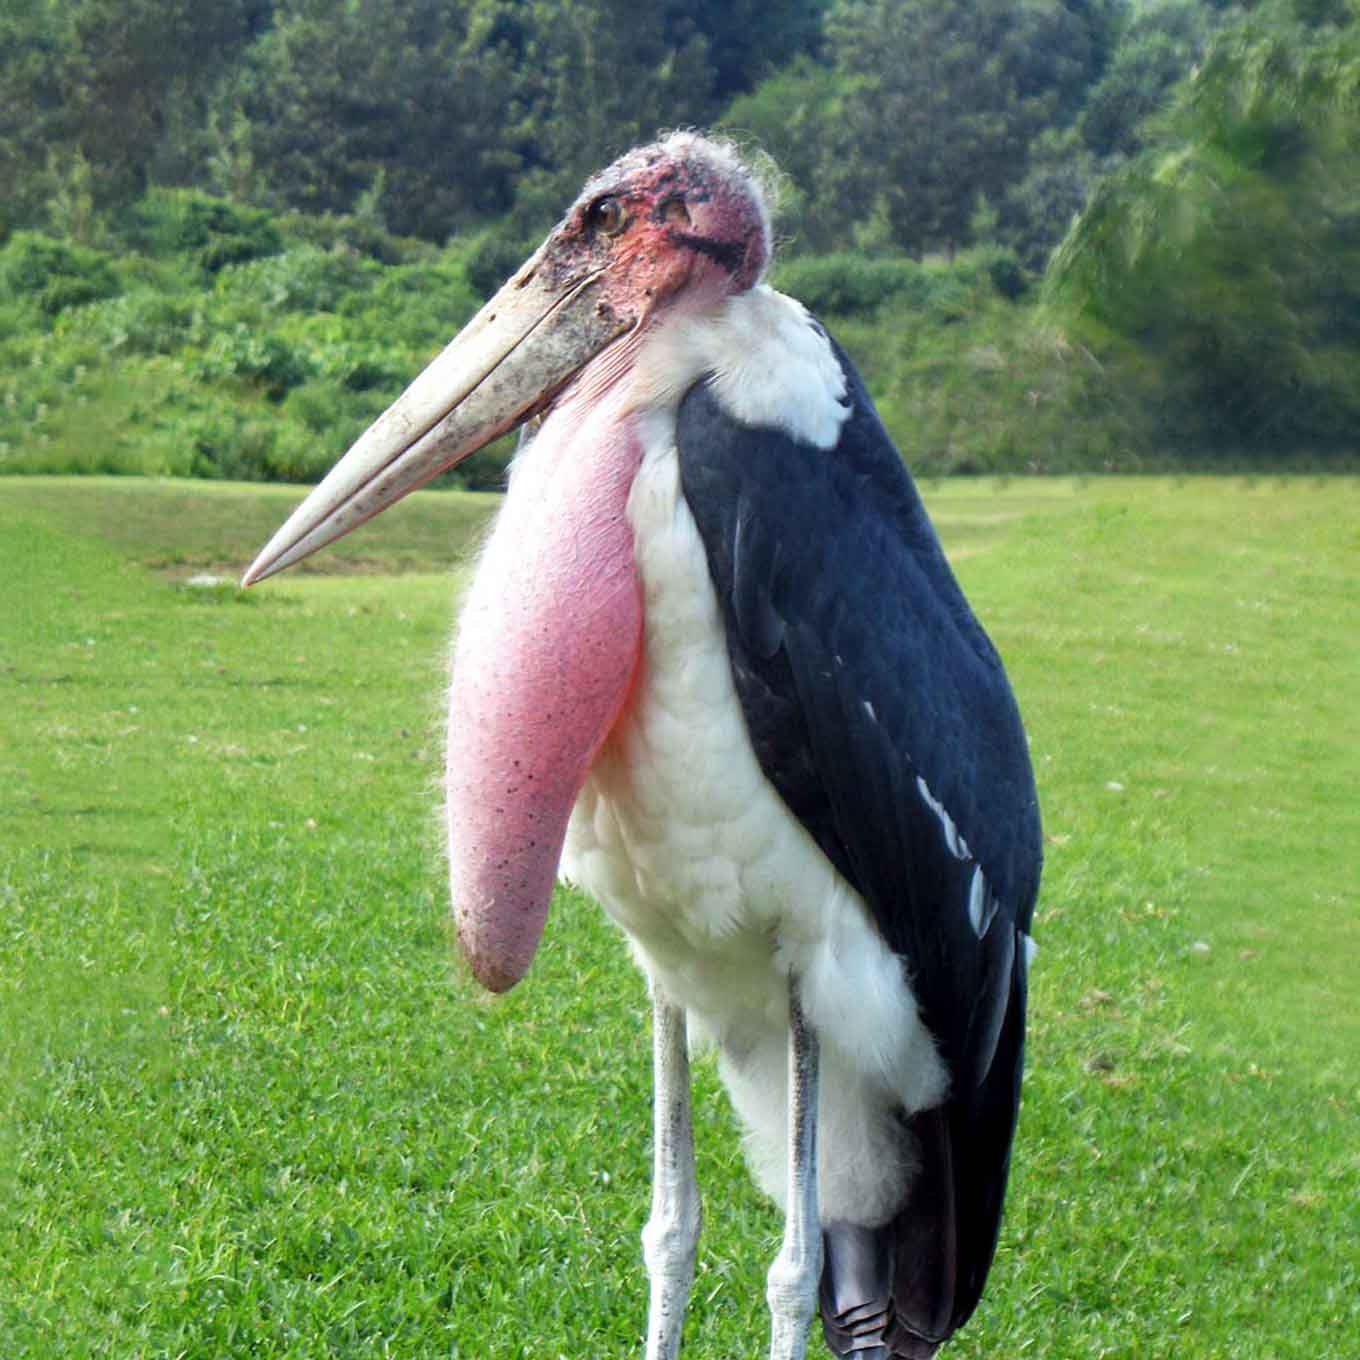 Marabou Stork surrounded by grass and greenery